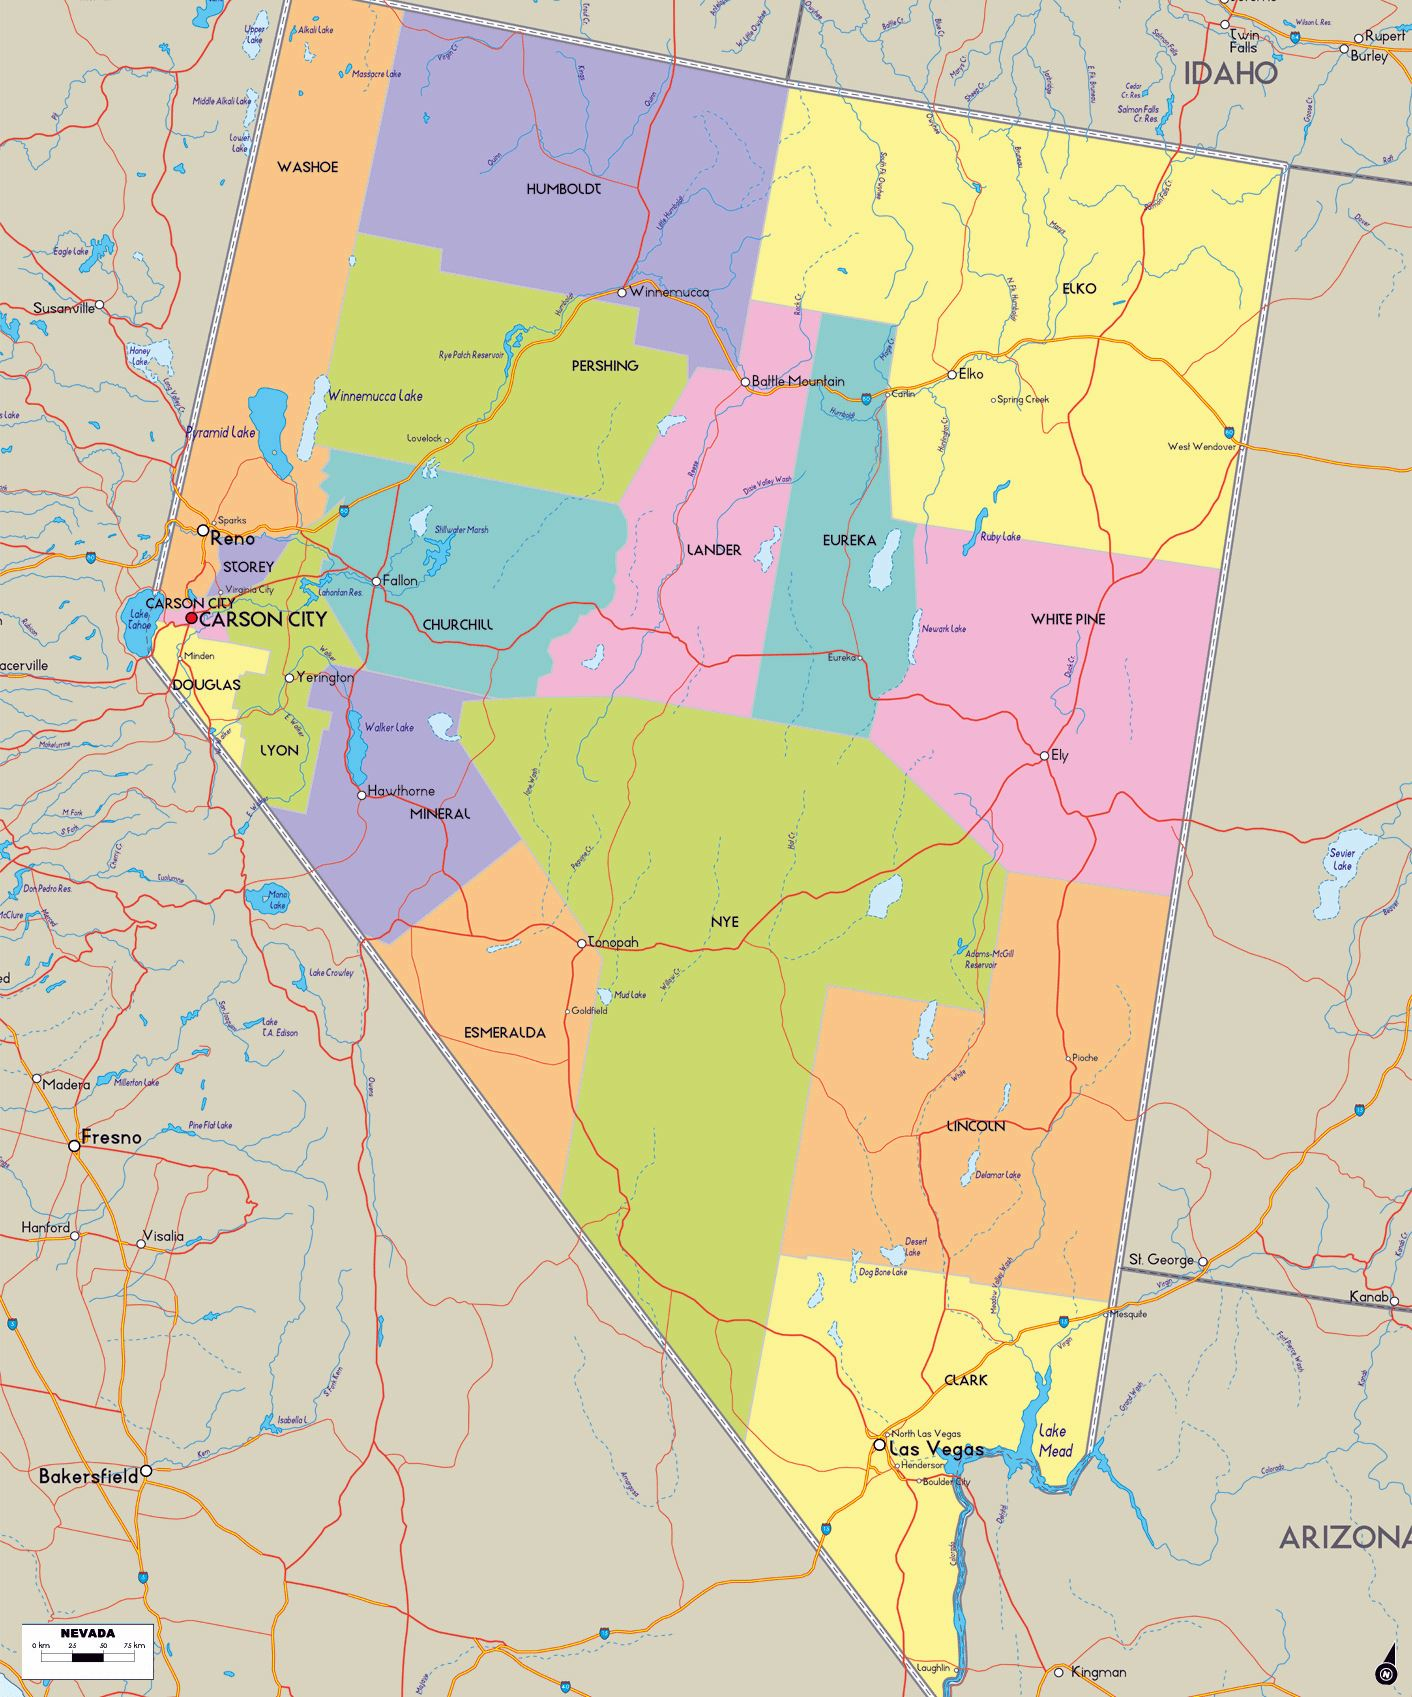 Large Nevada Maps For Free Download And Print High 